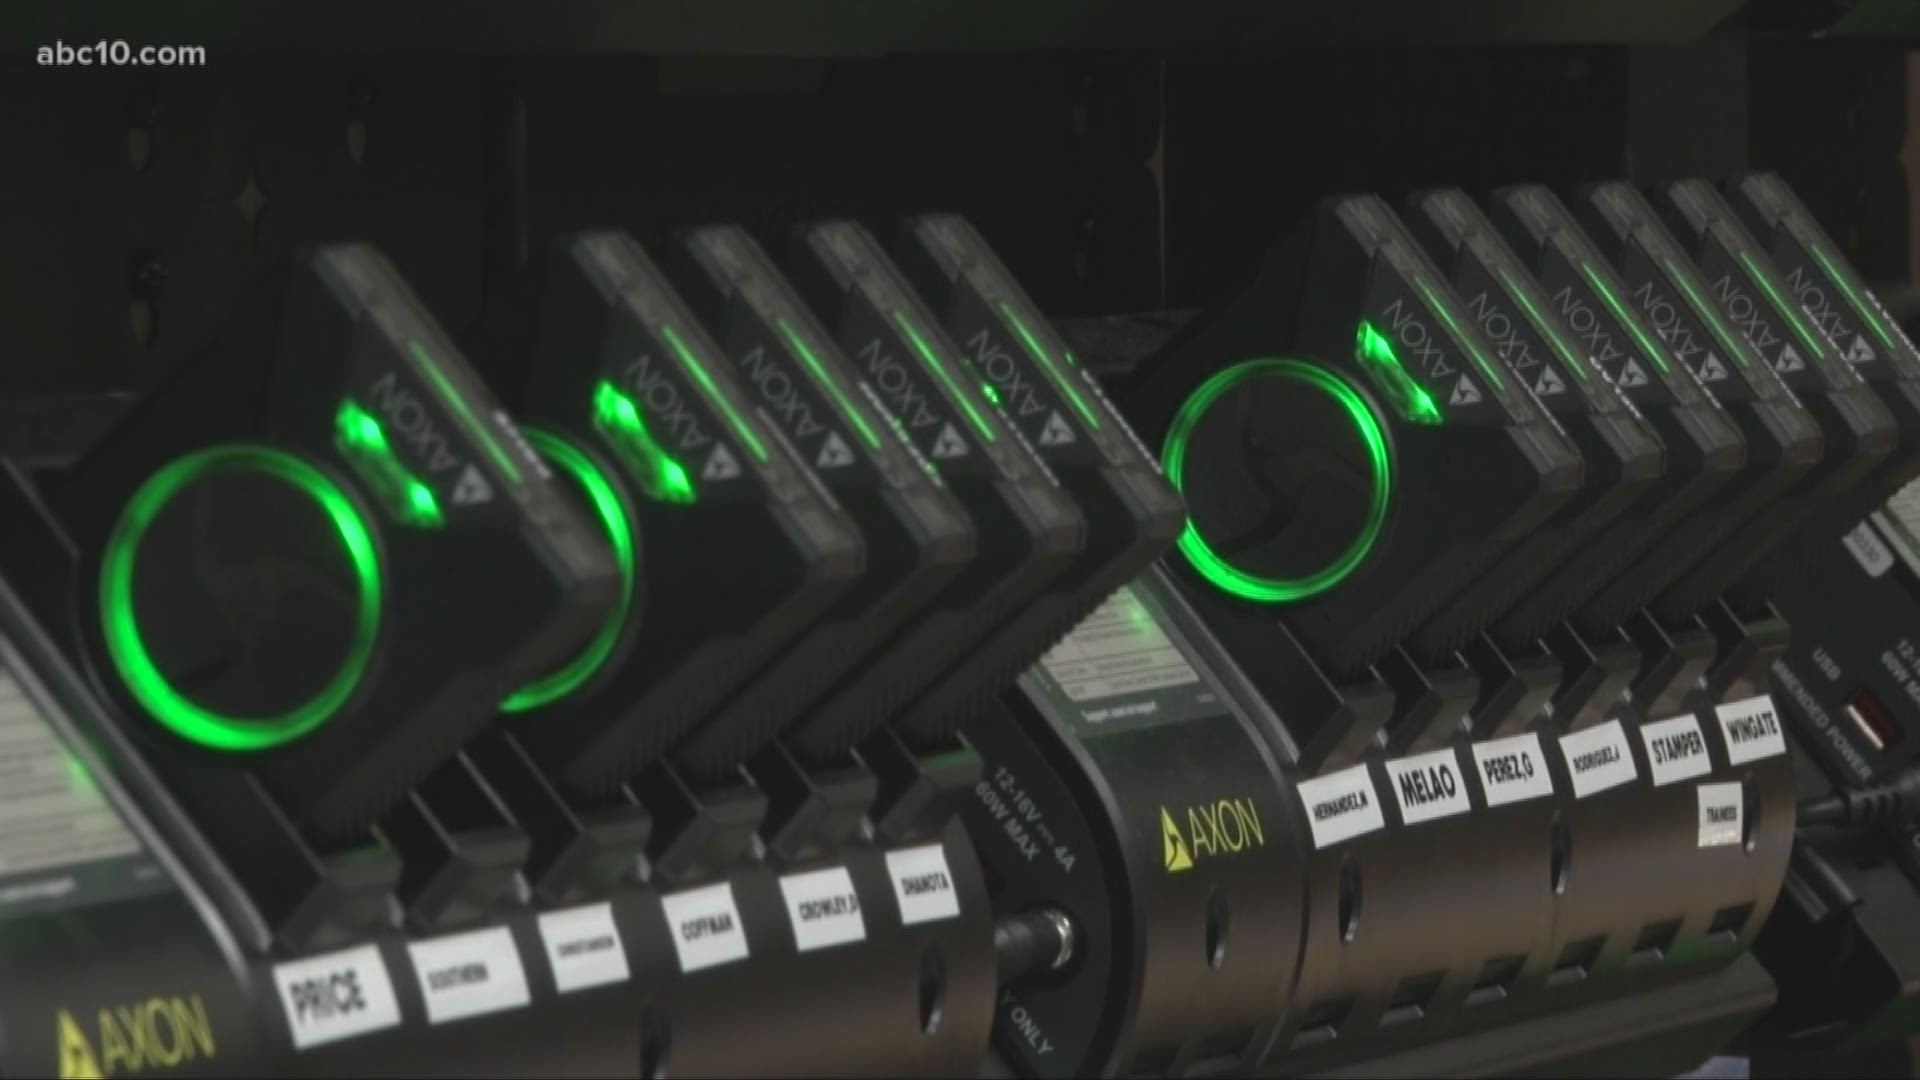 From now on, if you have a run-in with deputies in Stanislaus County, you'll likely be recorded. The Stanislaus County Sheriff's Department started rolling out body cameras for the first time this month.